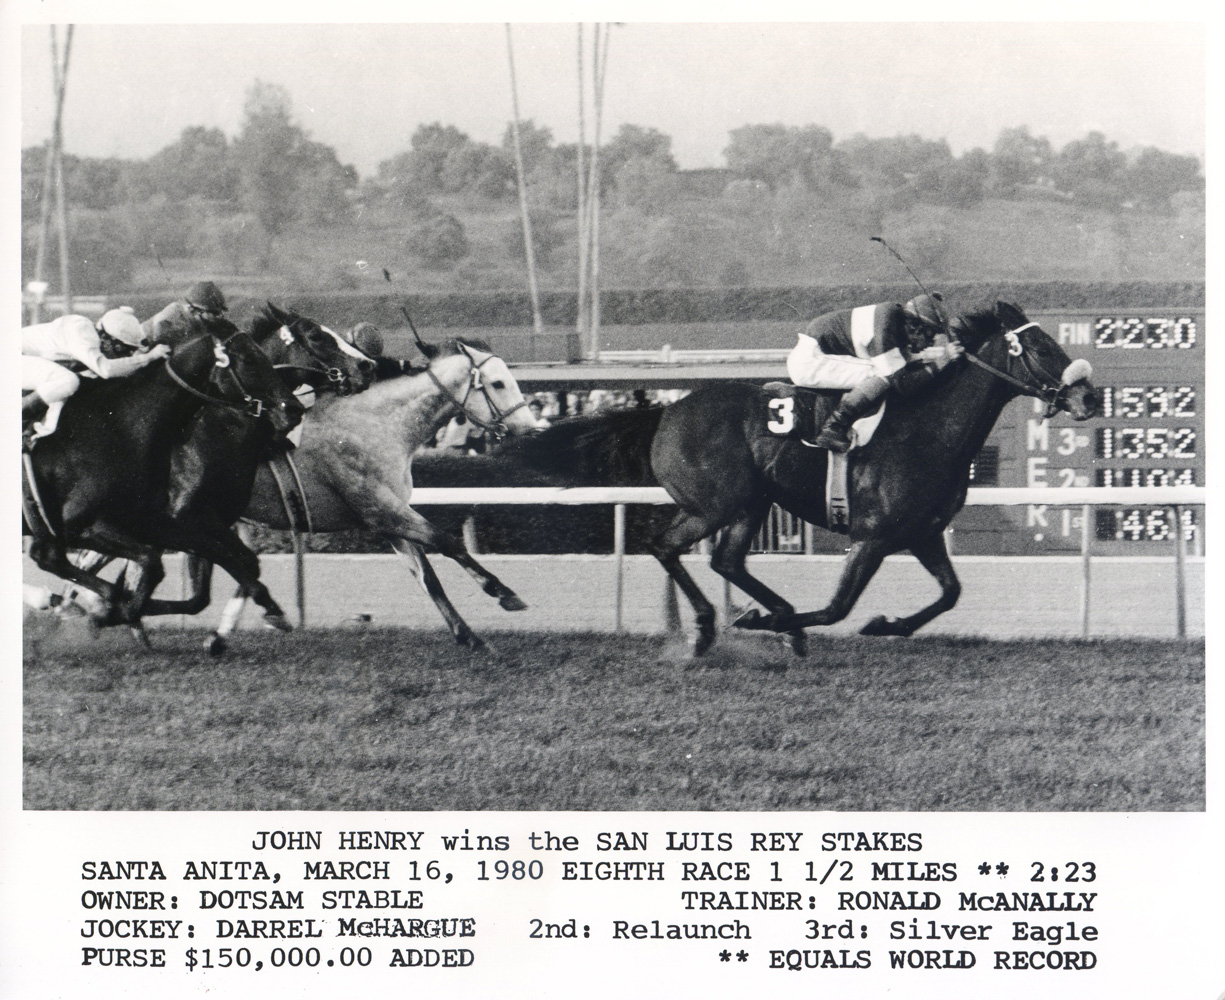 Darrel McHargue and John Henry winning the 1980 San Luis Rey Stakes at Santa Anita and equaling a world record (Bill Mochon/Museum Collection)